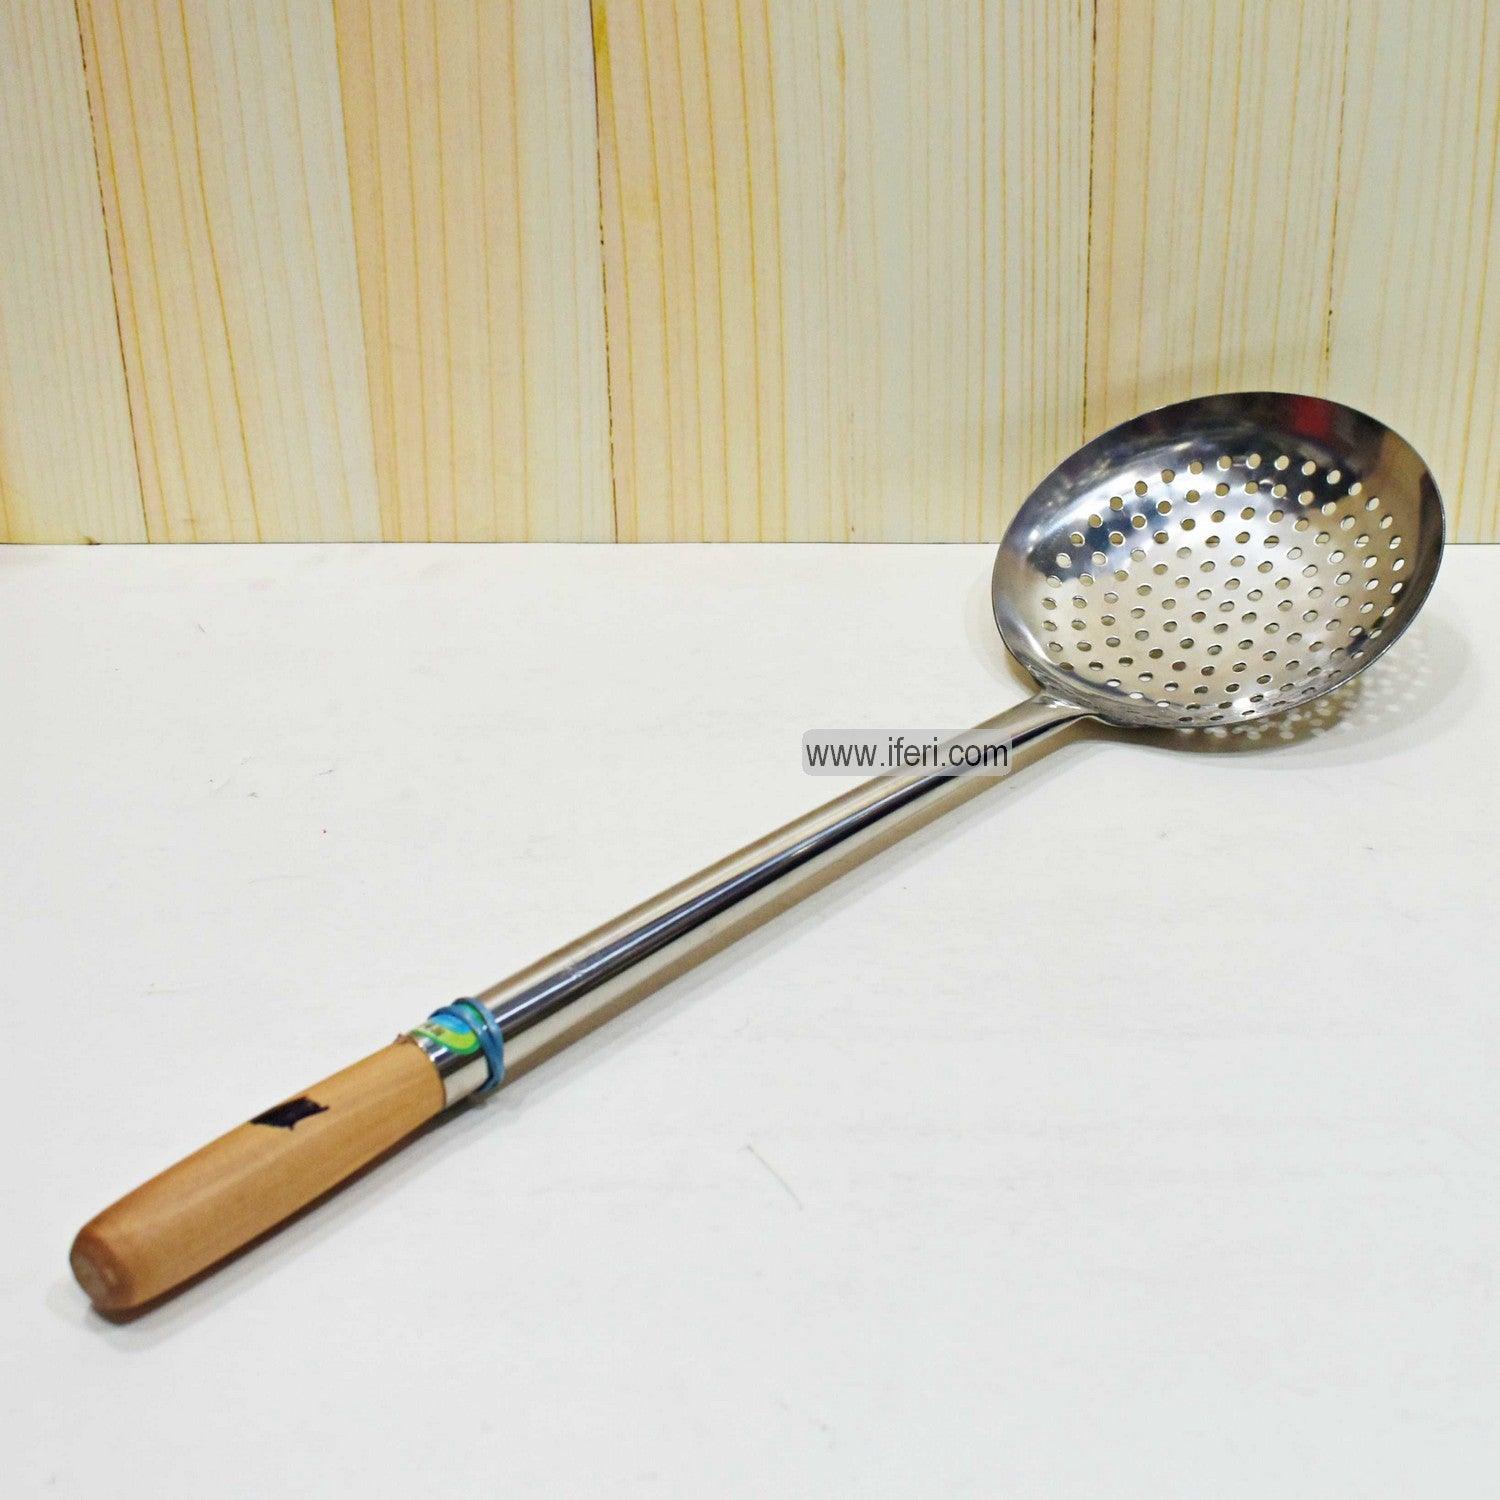 23 inch Stainless Steel Skimmer Spoon Colander Strainer for Cooking and Frying SN0692 Price in Bangladesh - iferi.com